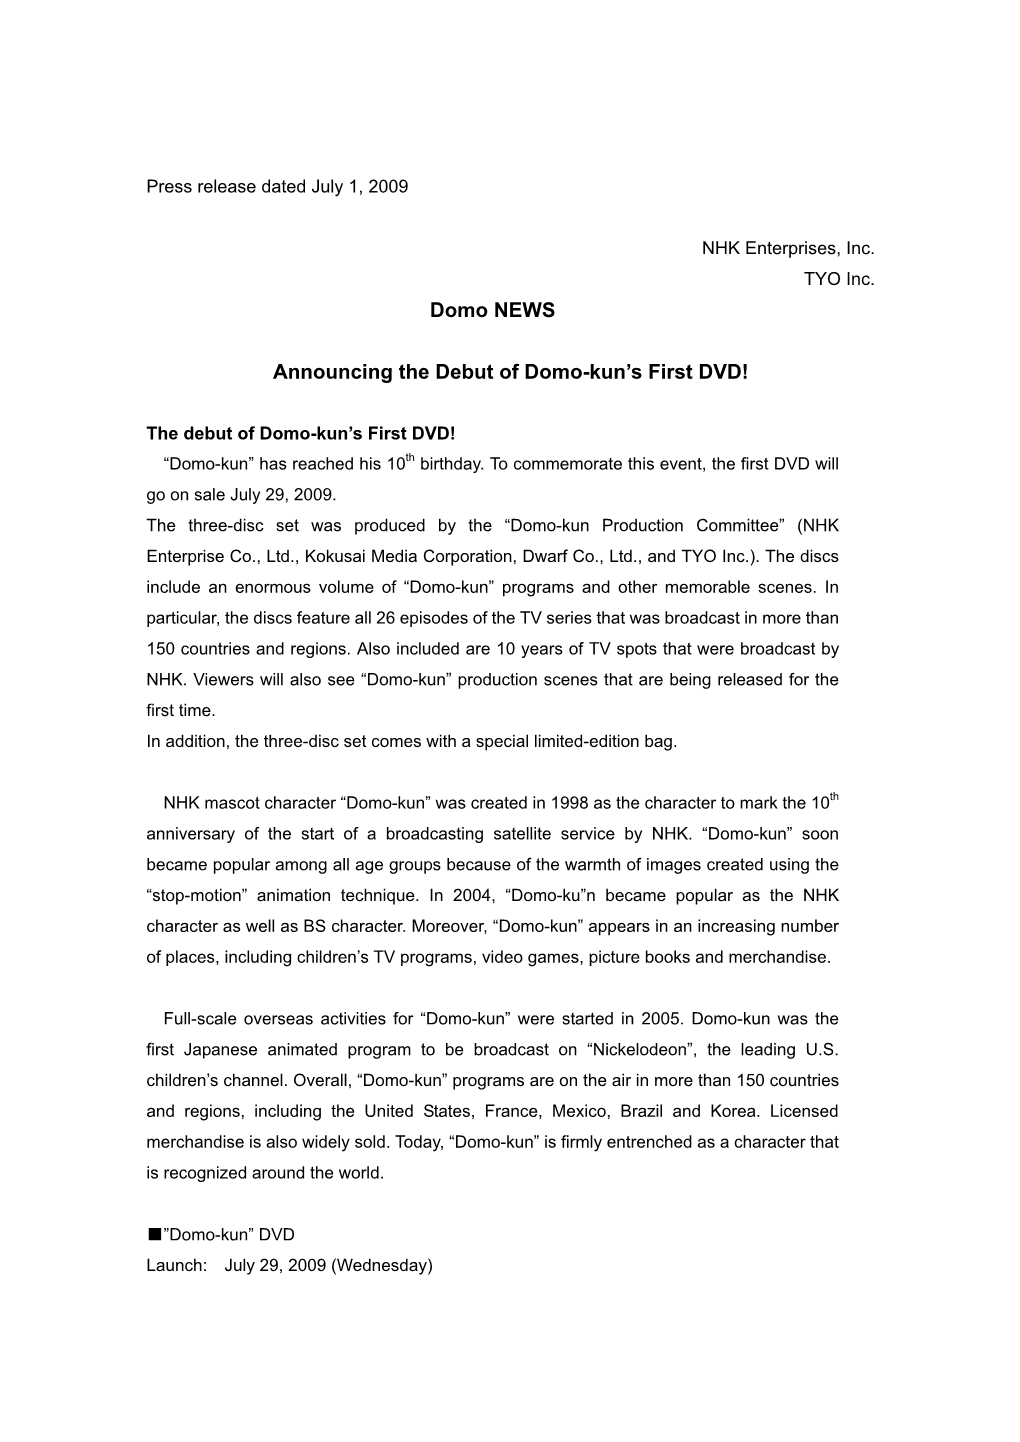 Press Release Dated July 1, 2009